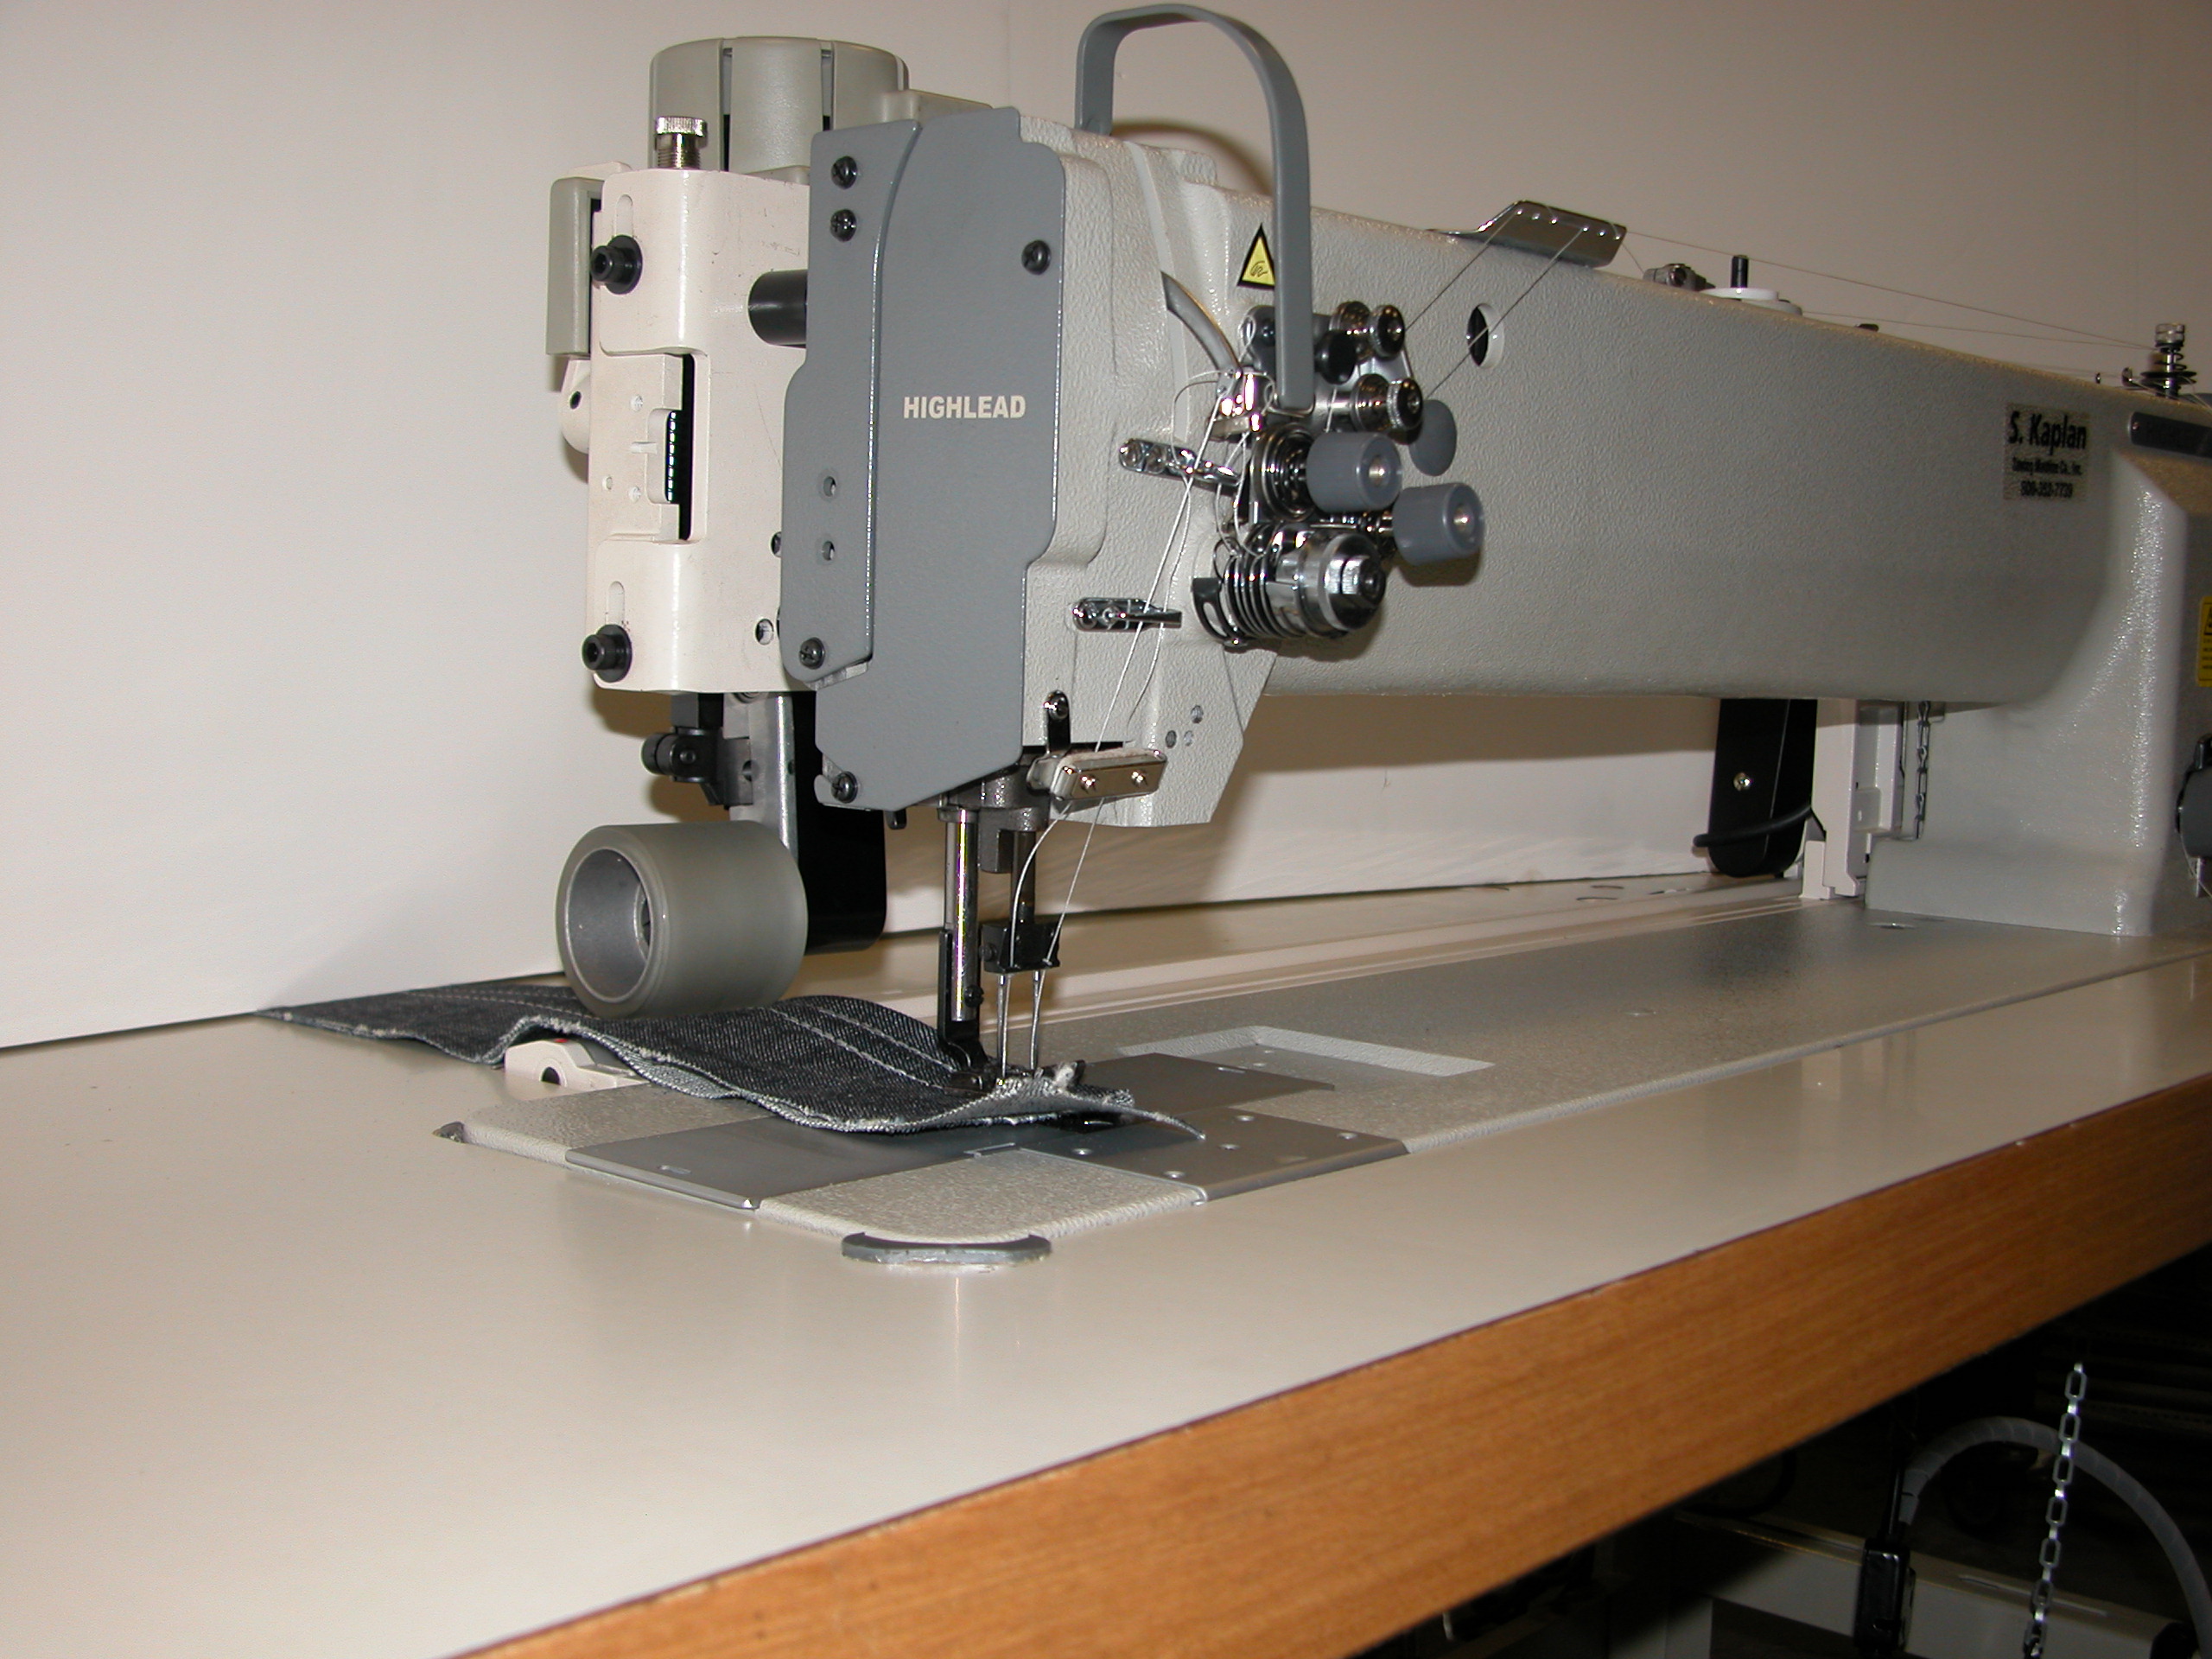 Highlead GC20698-1 & GC20698-2 Sewing Machines